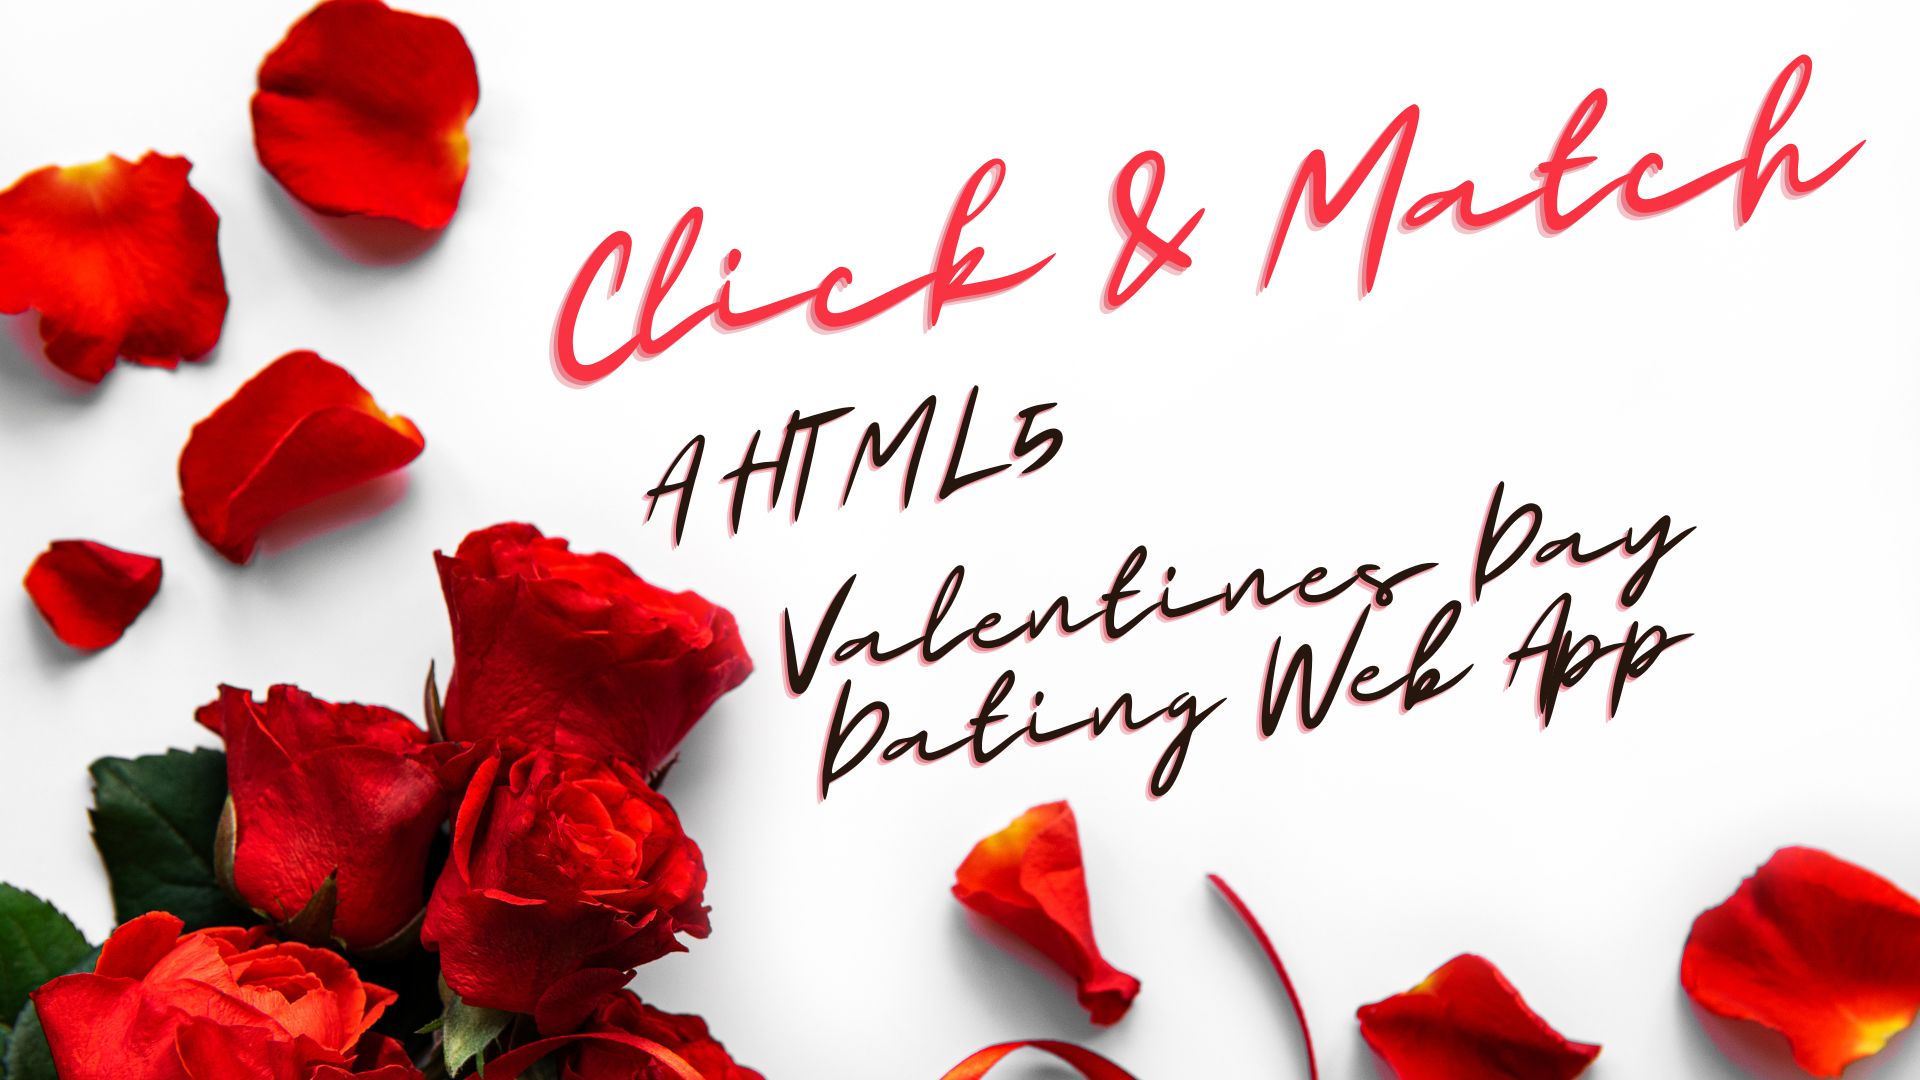 Click and Match - a HTML5 Valentine's day dating web-app